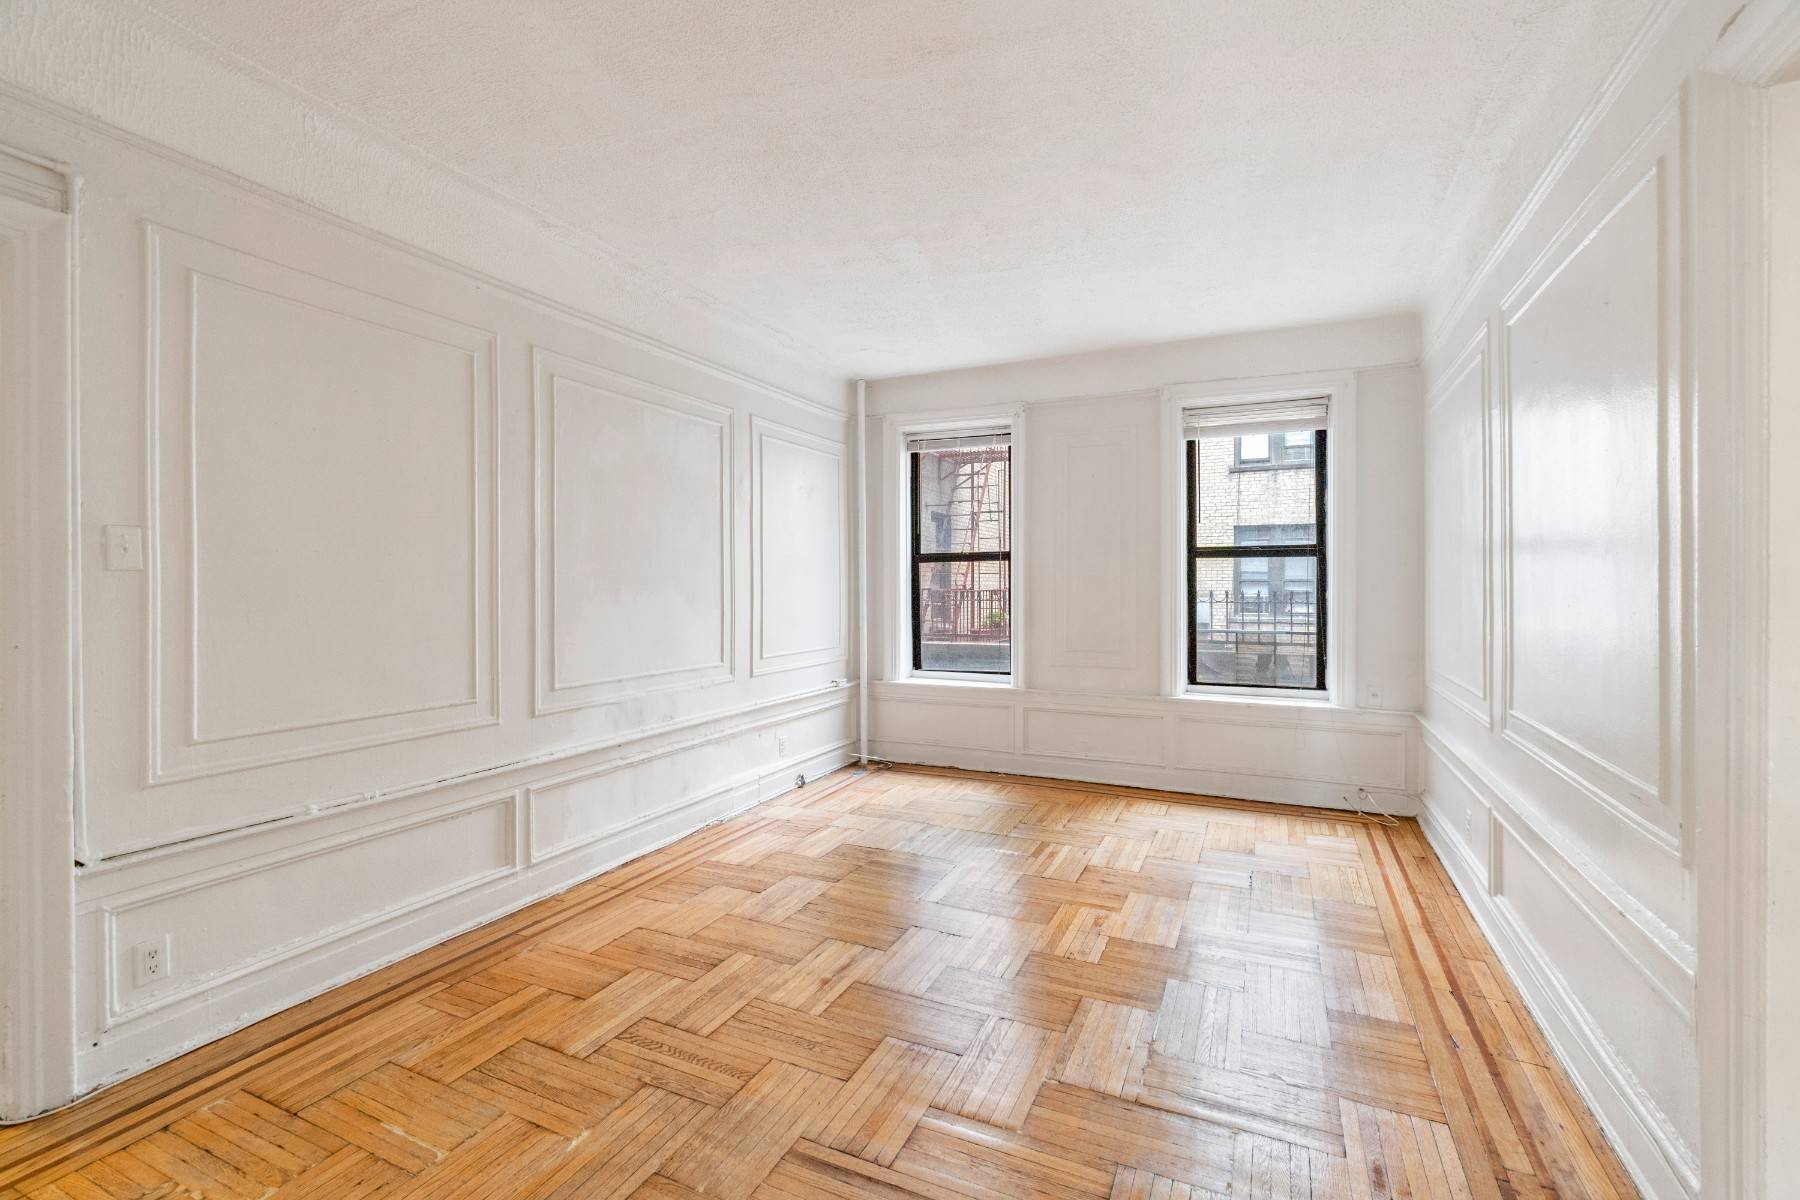 This is a huge sun bathed 2 bedroom apartment across the street from prospect park on Ocean avenue.